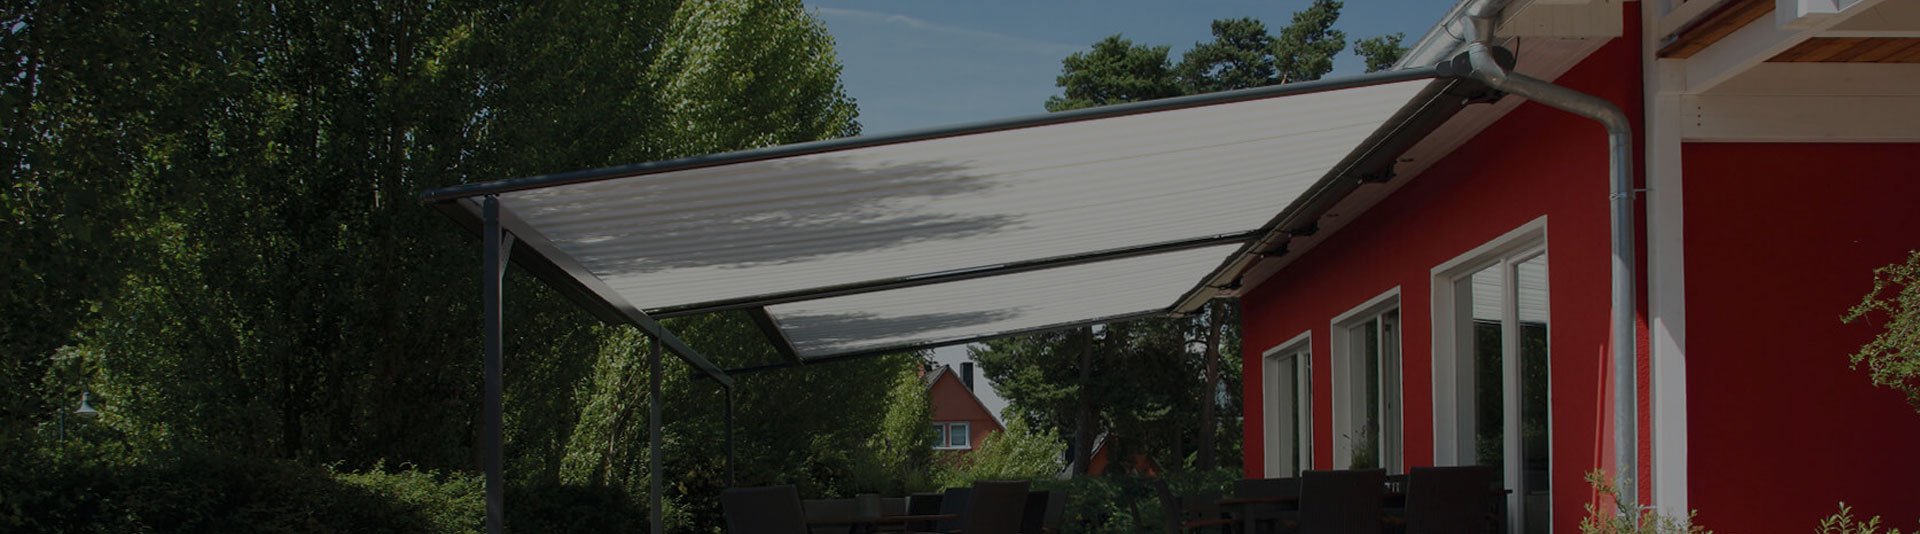 Awning vs Pergola: Which Should You Choose?